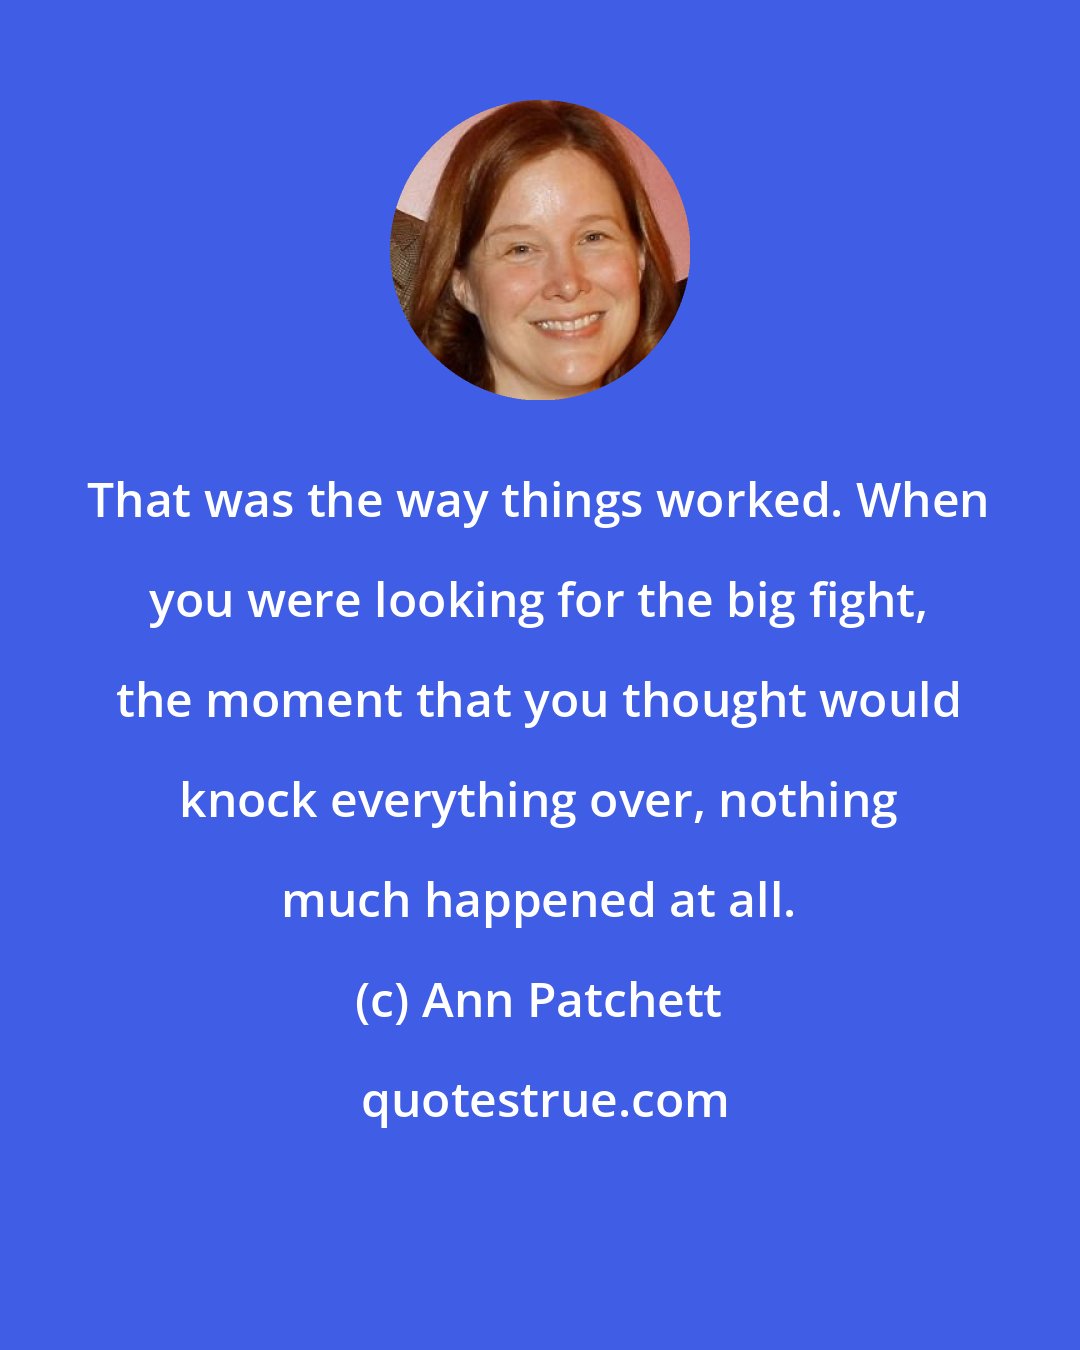 Ann Patchett: That was the way things worked. When you were looking for the big fight, the moment that you thought would knock everything over, nothing much happened at all.